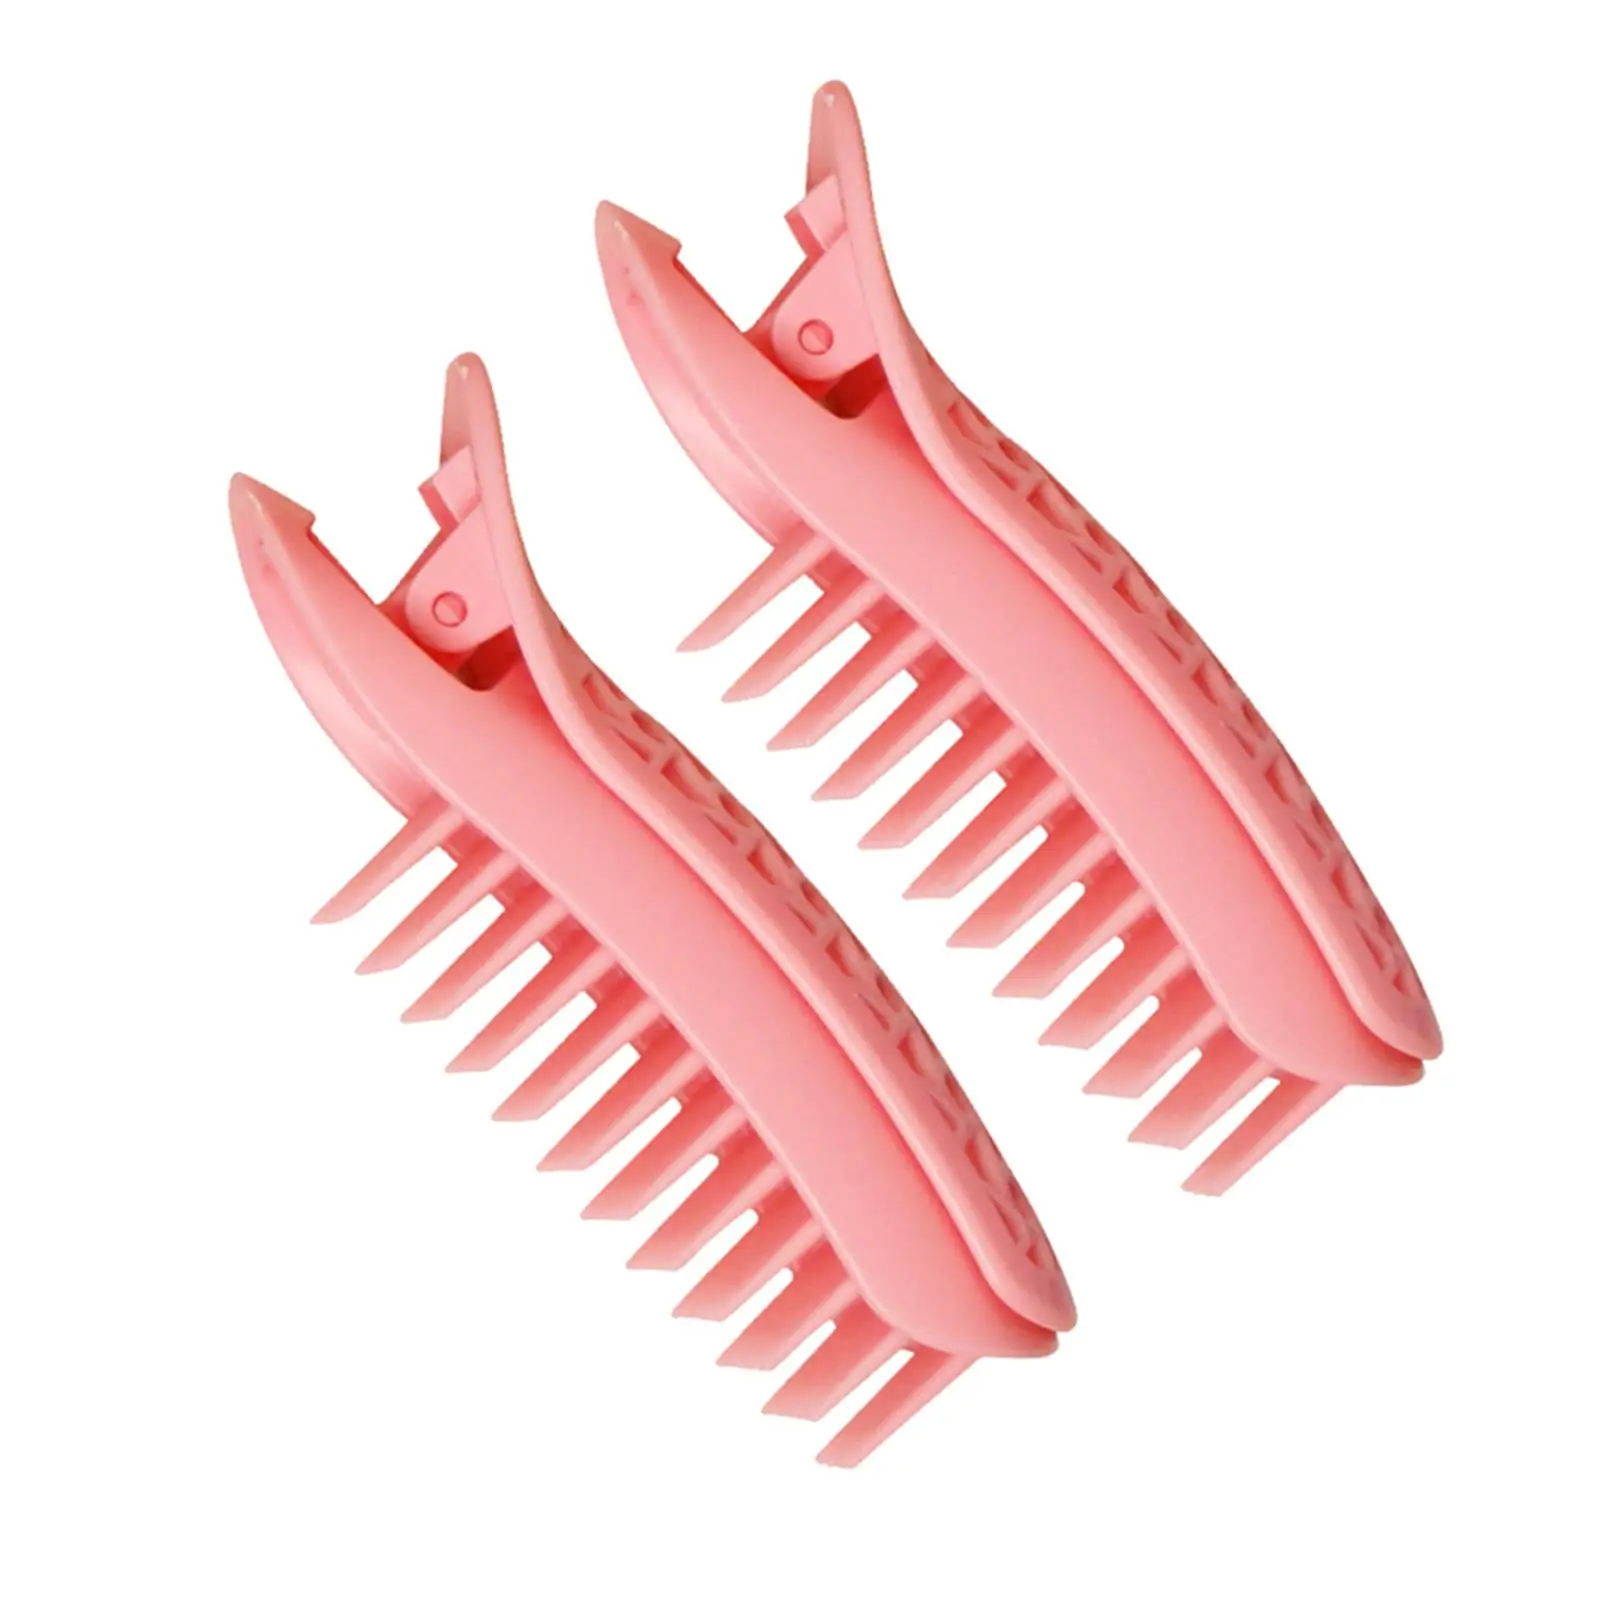 2 Pieces Curling Clips Durable Styling Accessories for Long Hair